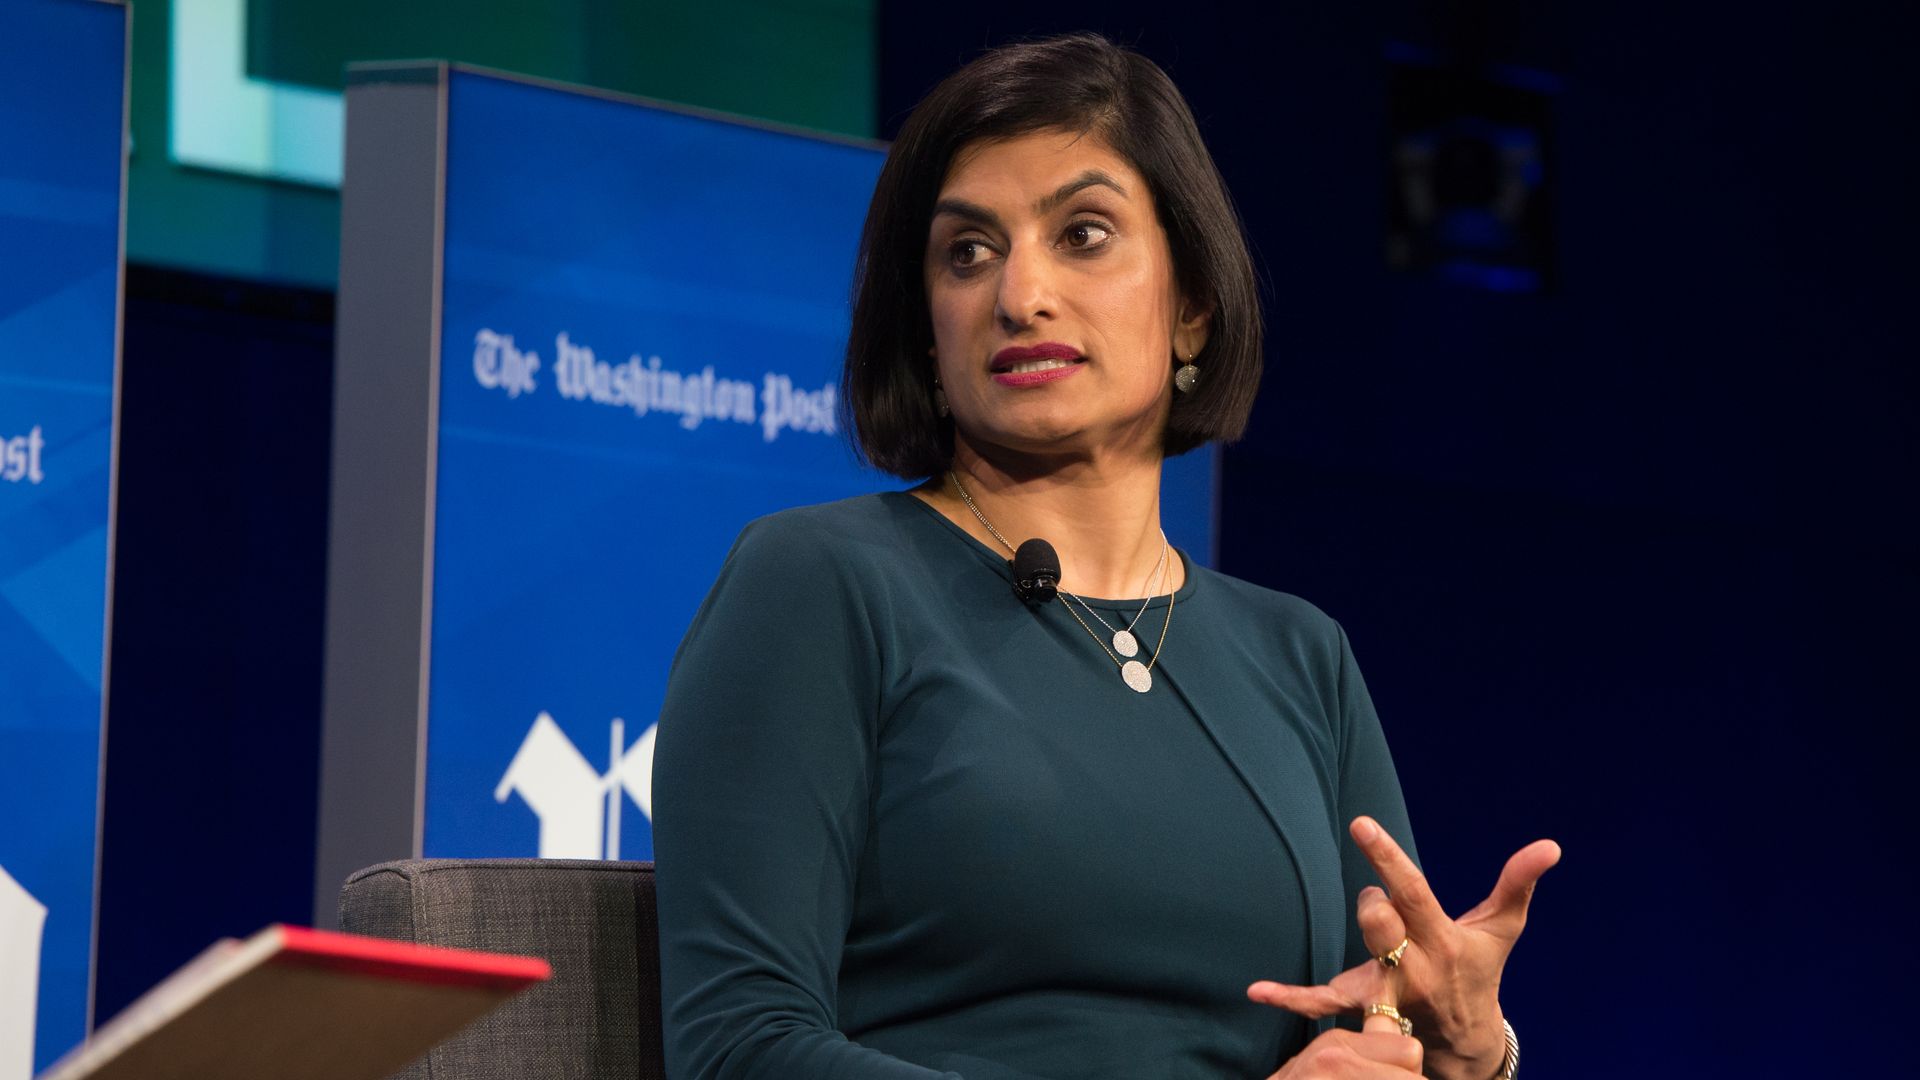 Seema Verma, Administrator of the Centers for Medicare and Medicaid Services, interviewed on stage